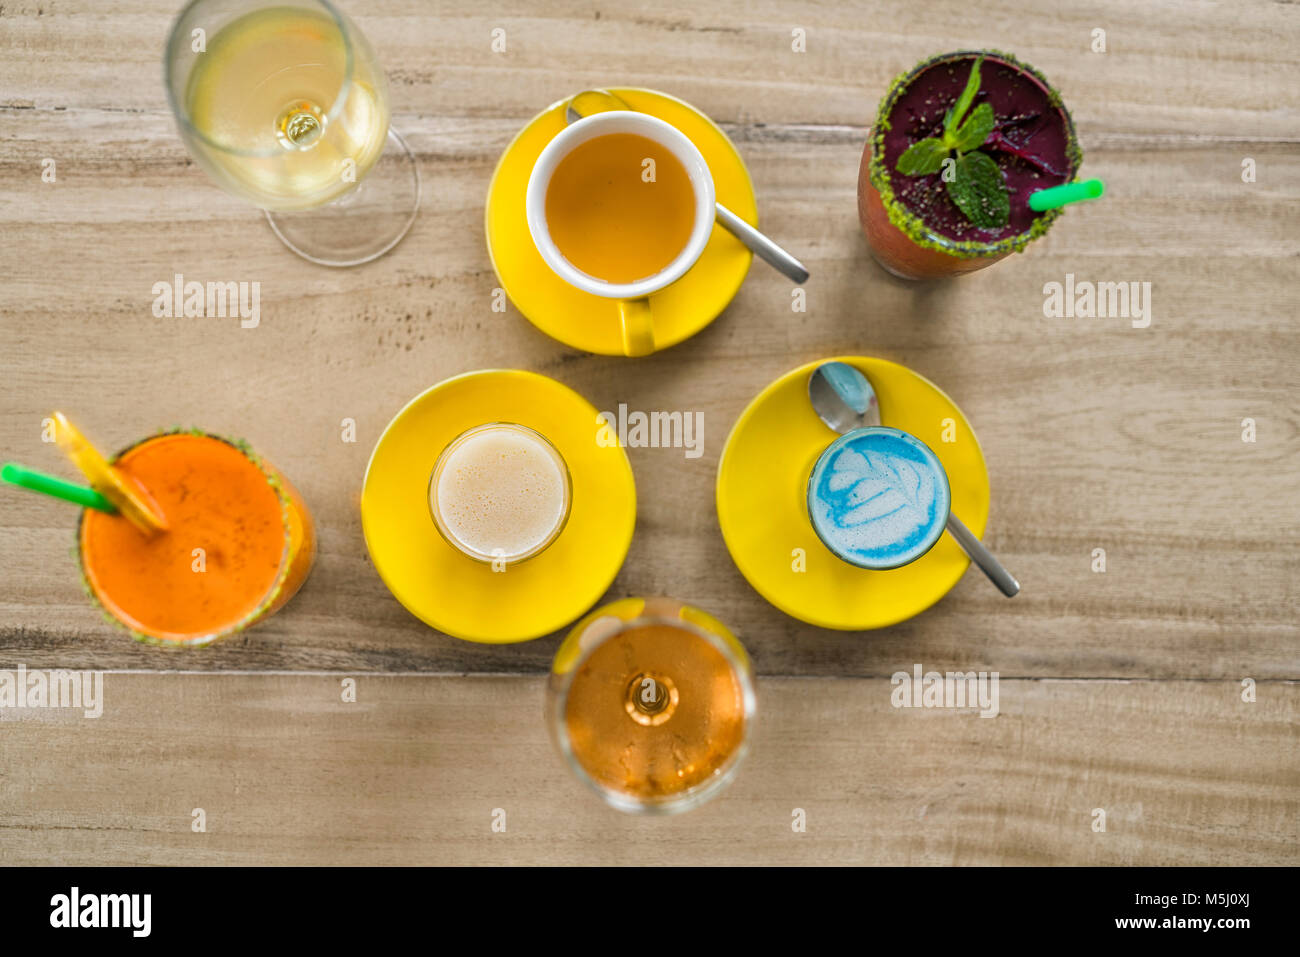 Wooden table with various beverages like smurf latte, smoothie, wine and tea Stock Photo